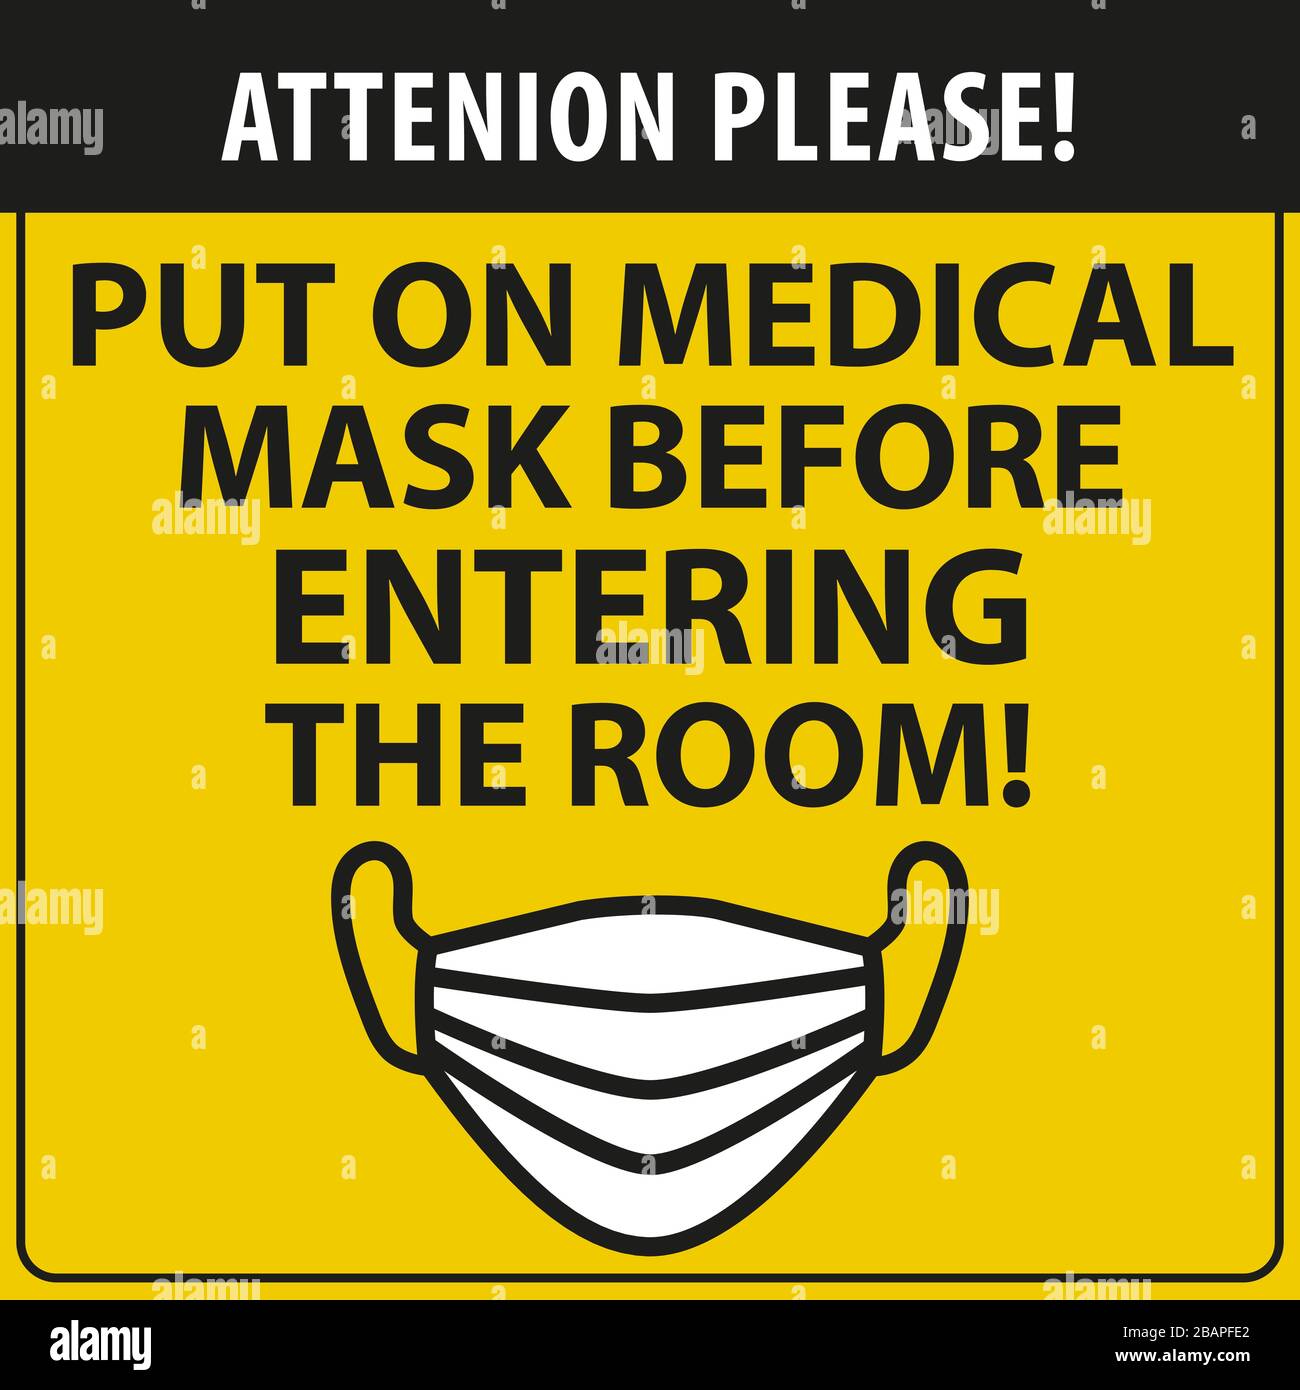 Coronavirus sign. Medicine mask icon. Entering the room only in a mask. Stopping the spread of the virus. Information warning sign about quarantine. Stock Vector